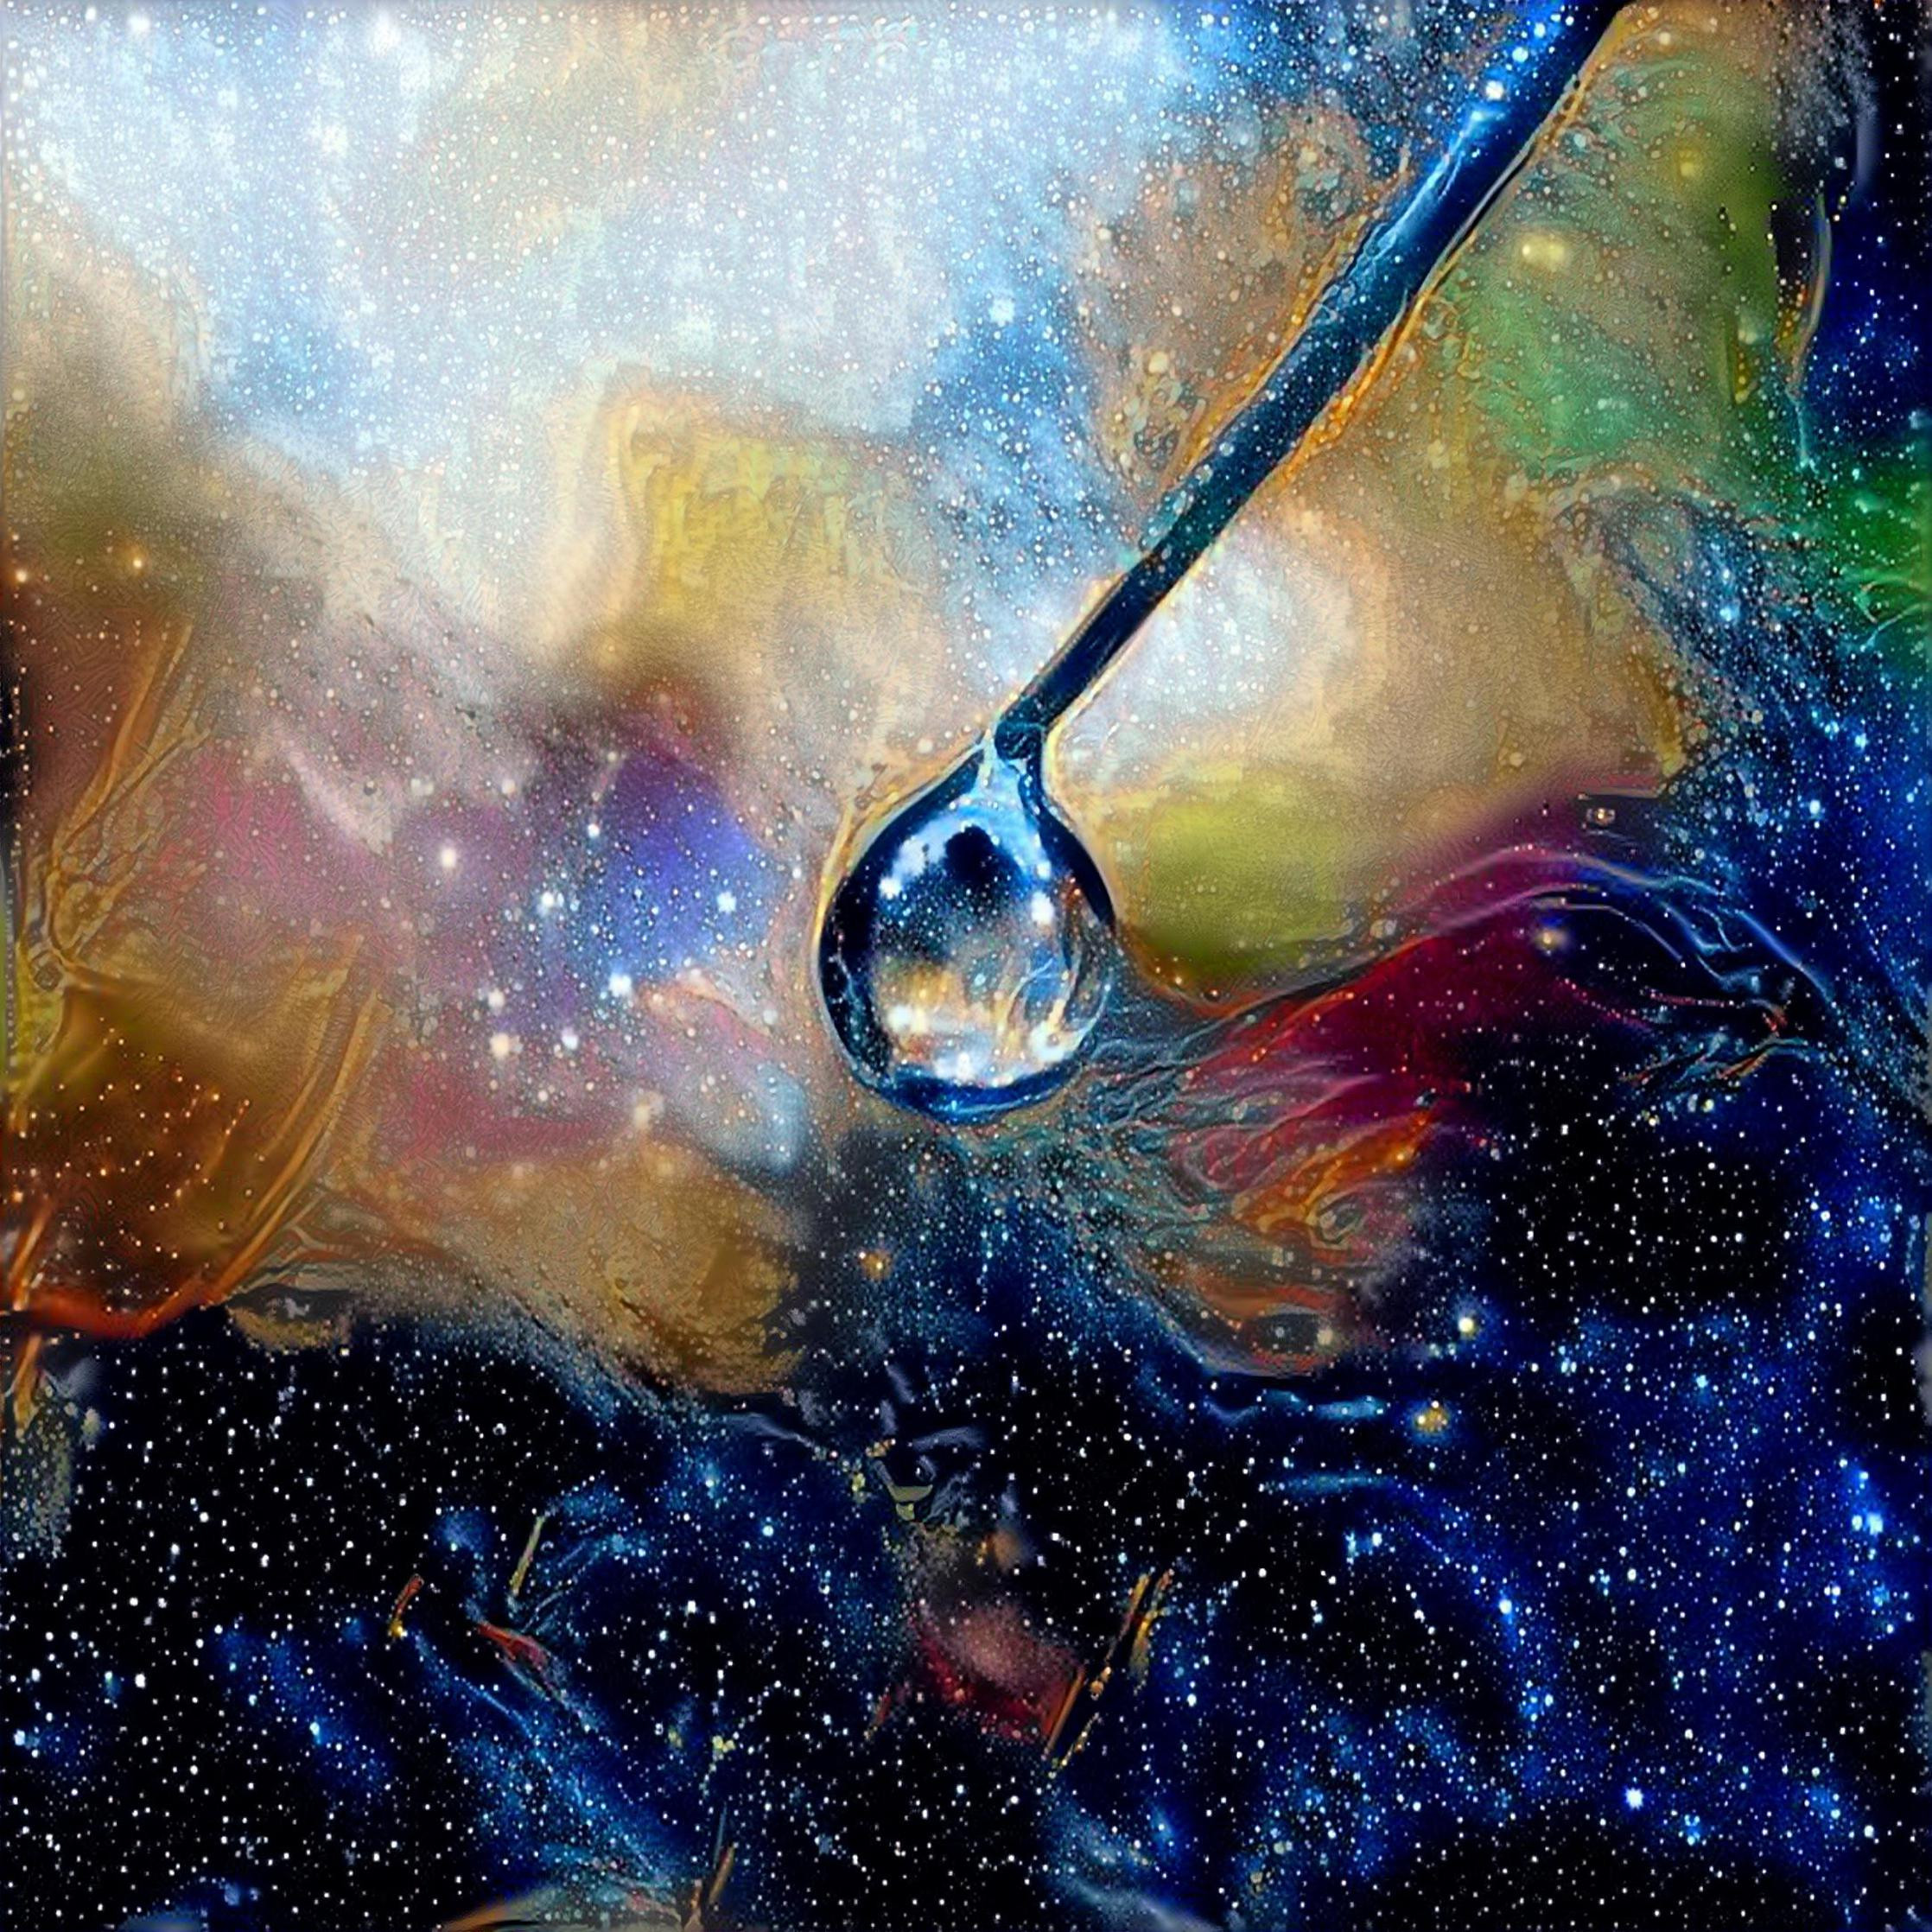 The Cosmos in a Raindrop